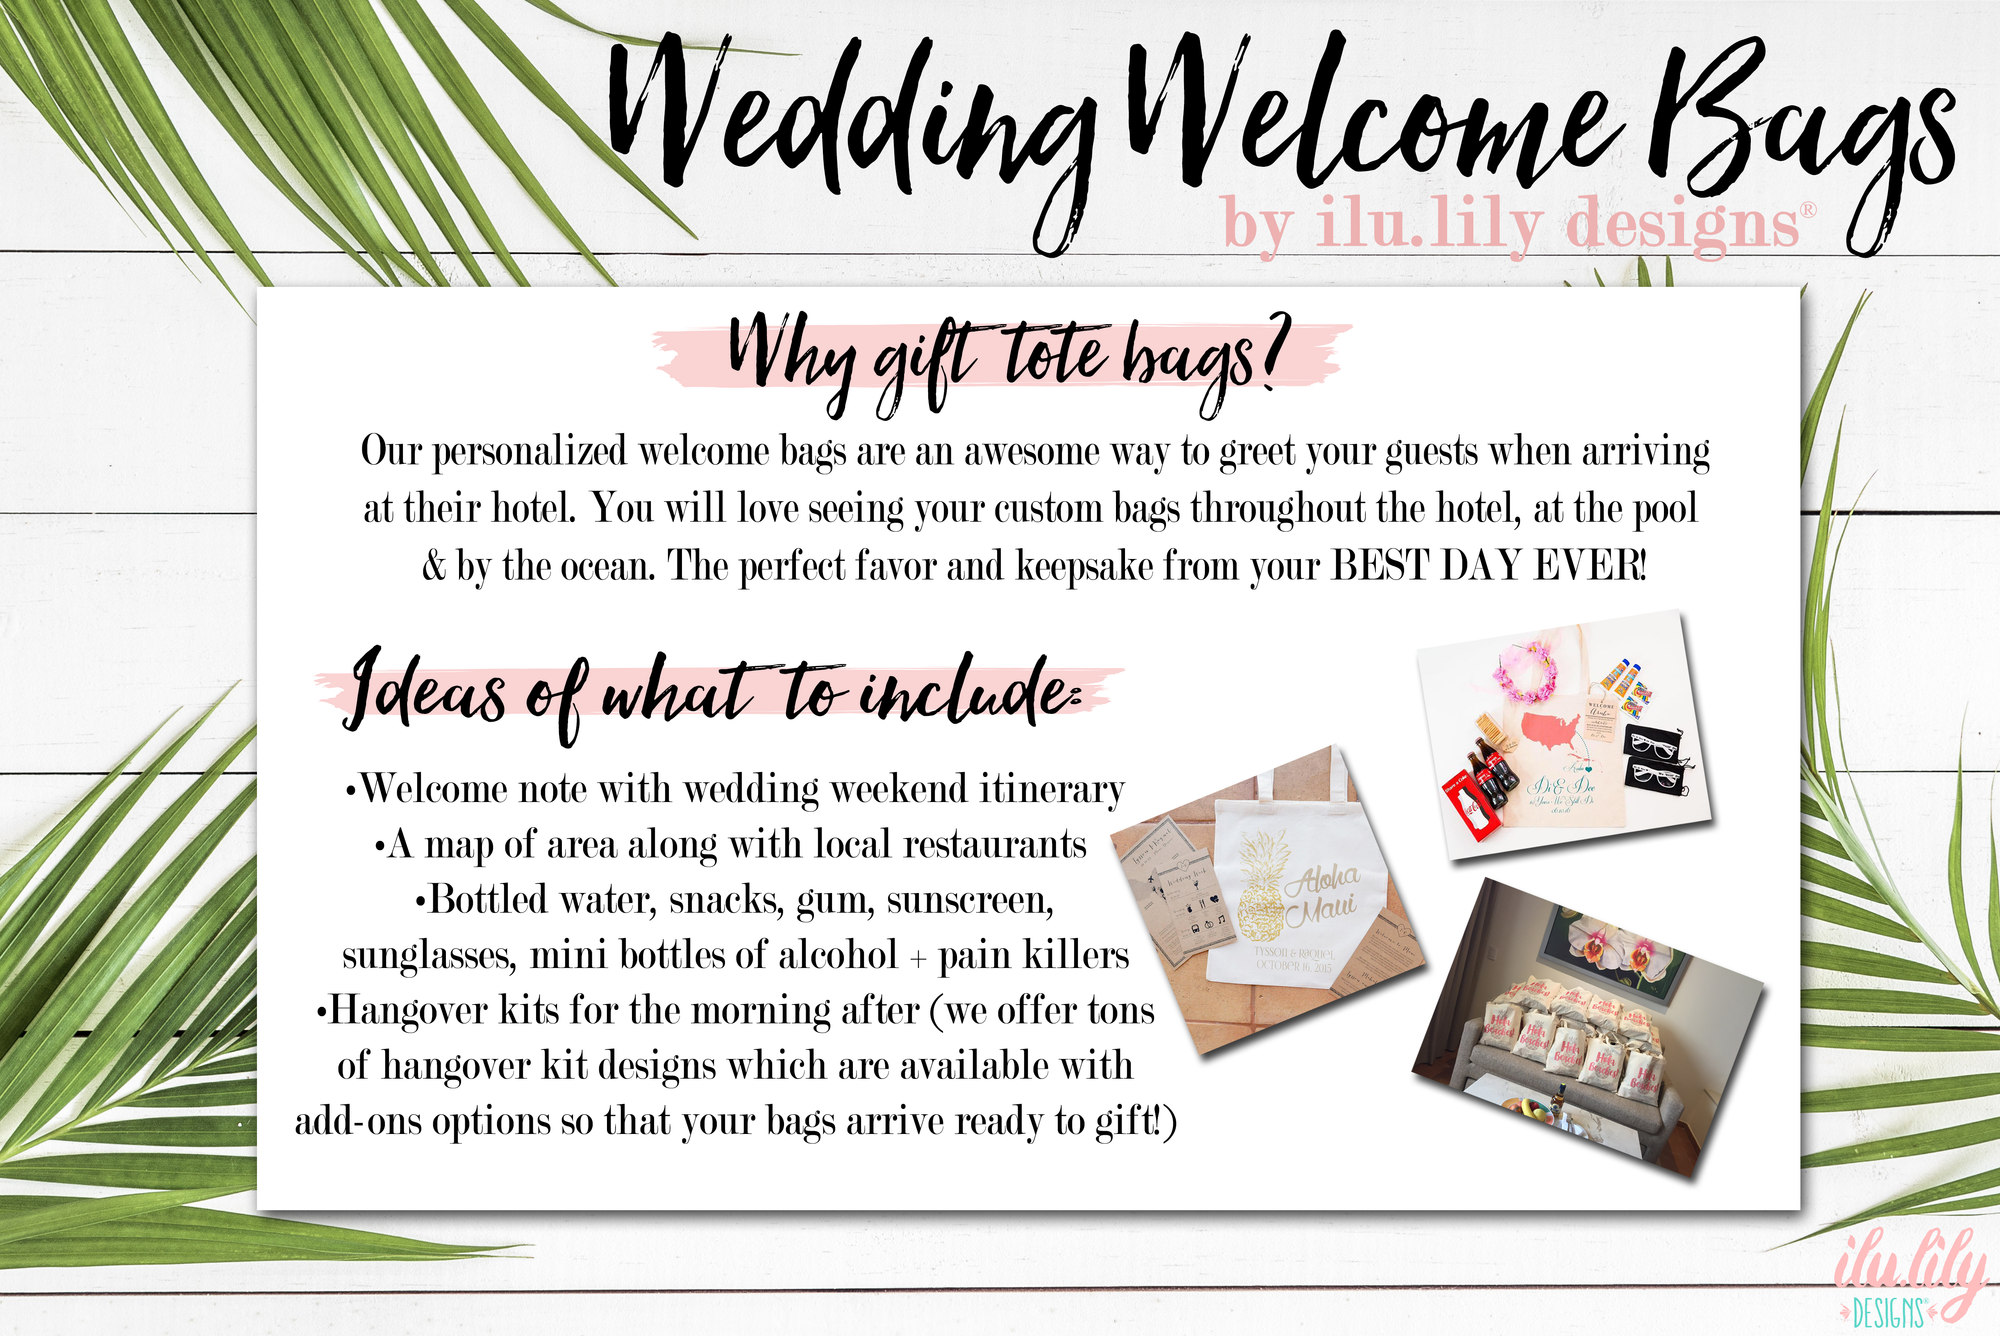 Personalized Wedding Welcome Letter & Itinerary - Blue Palms